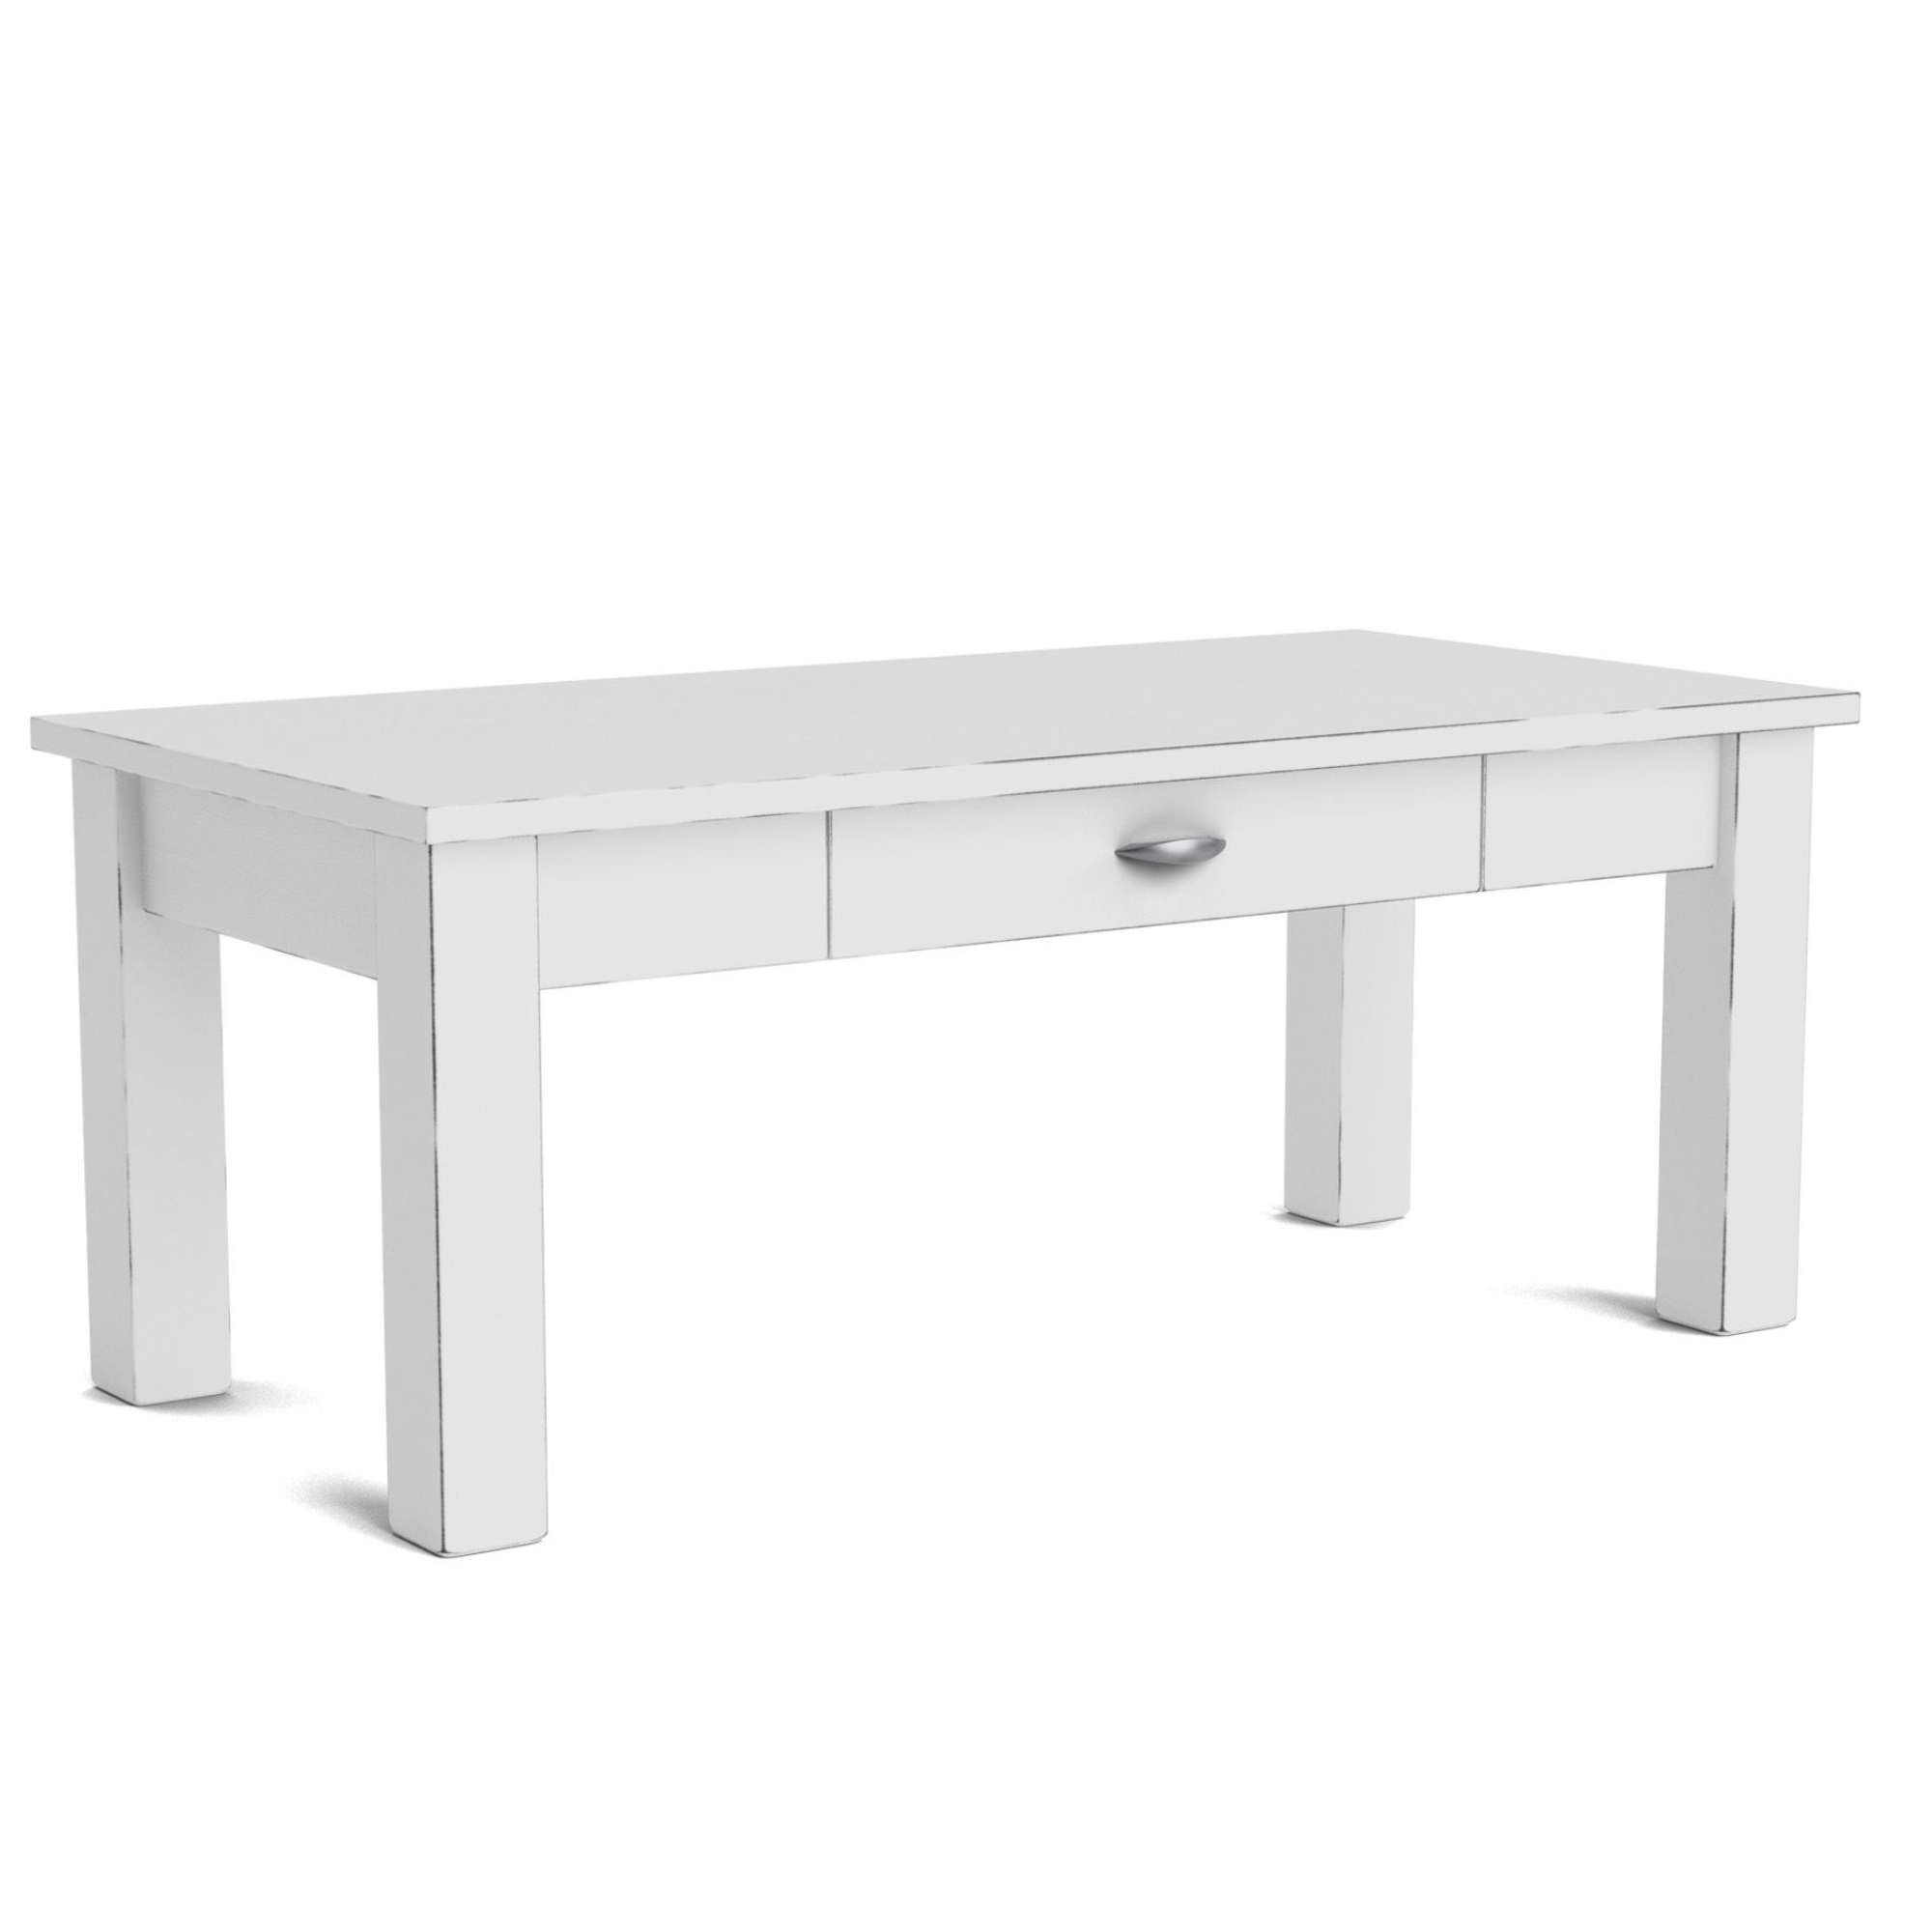 CHARLTON COFFEE TABLE WITH DRAWER | NZ MADE